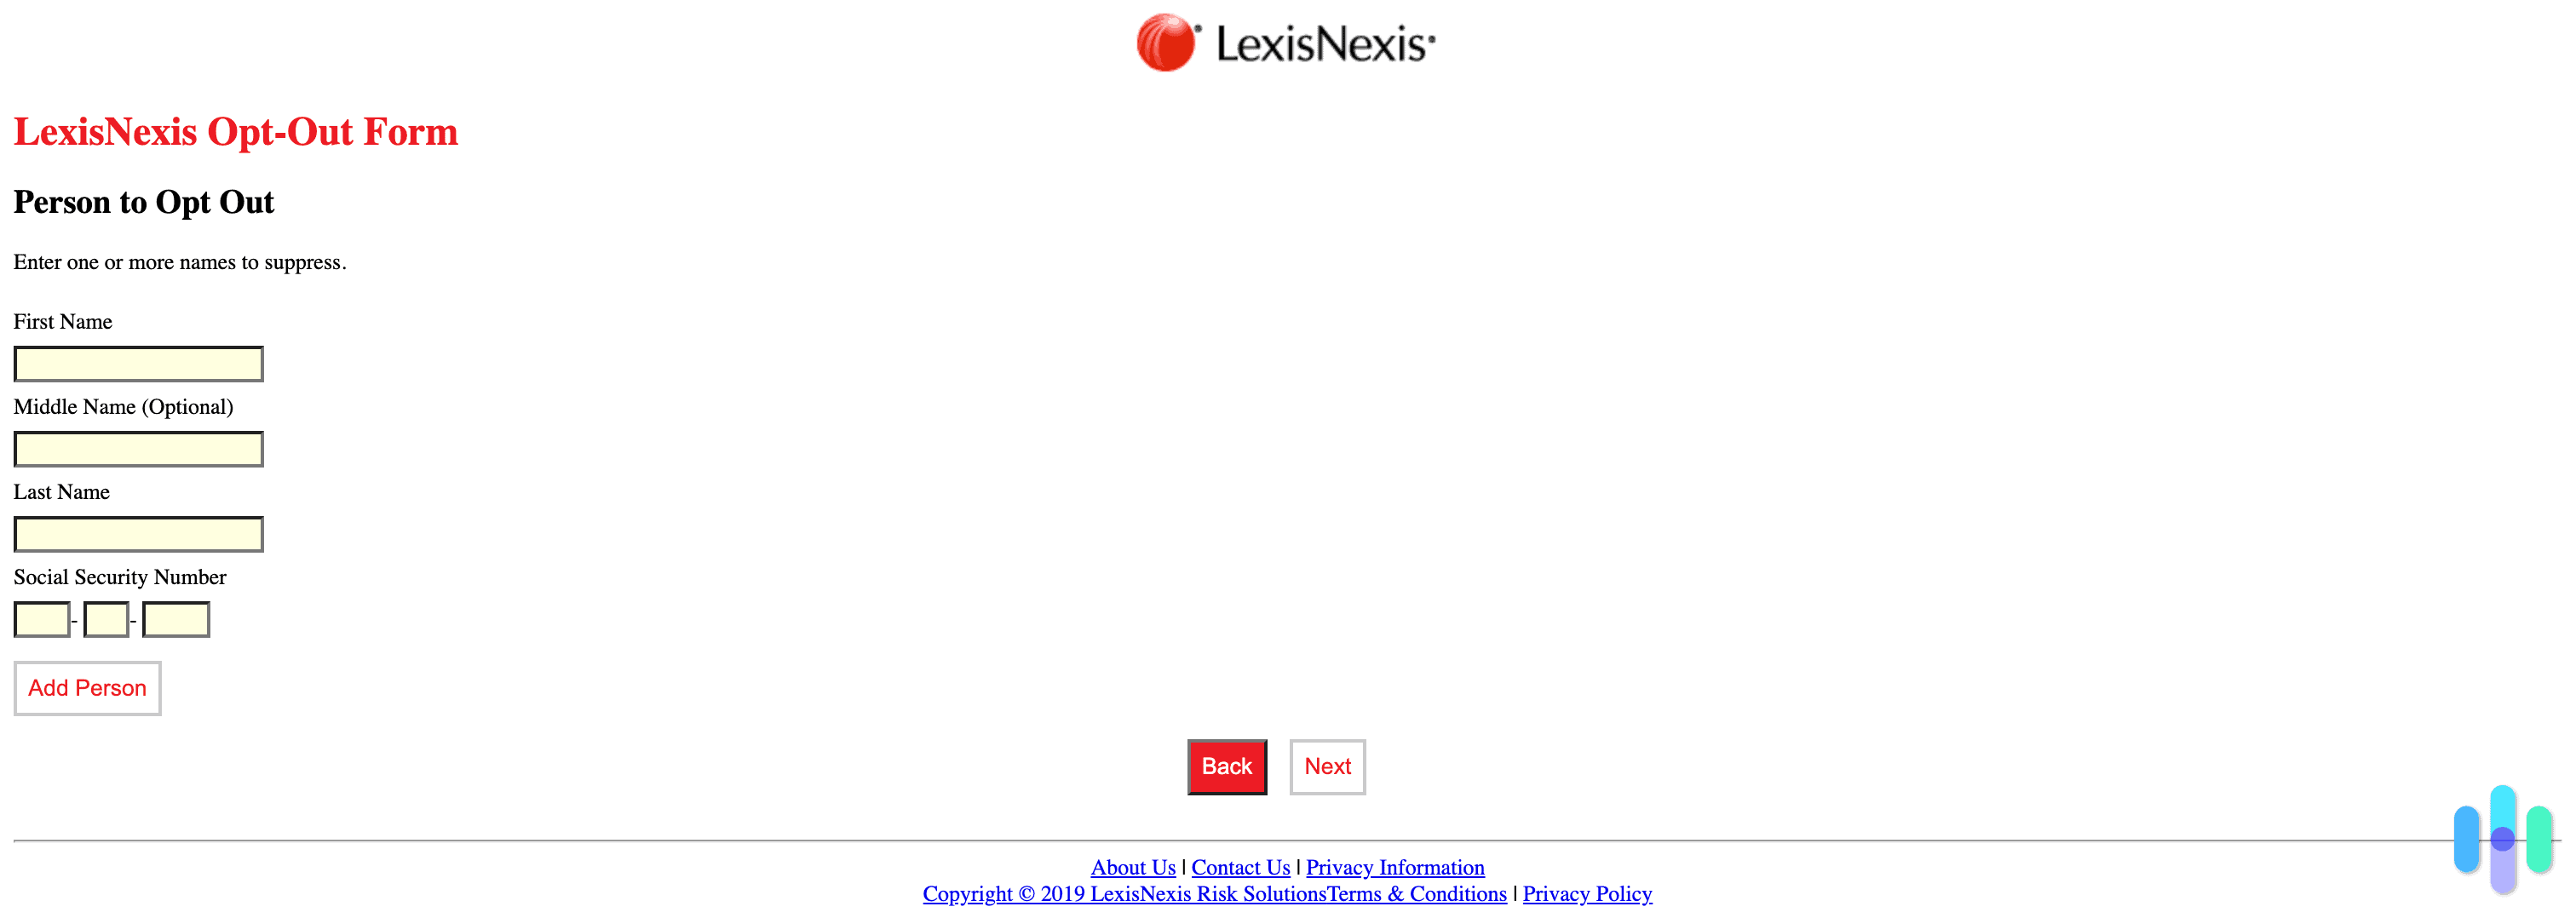 The LexisNexis opt out form contact information